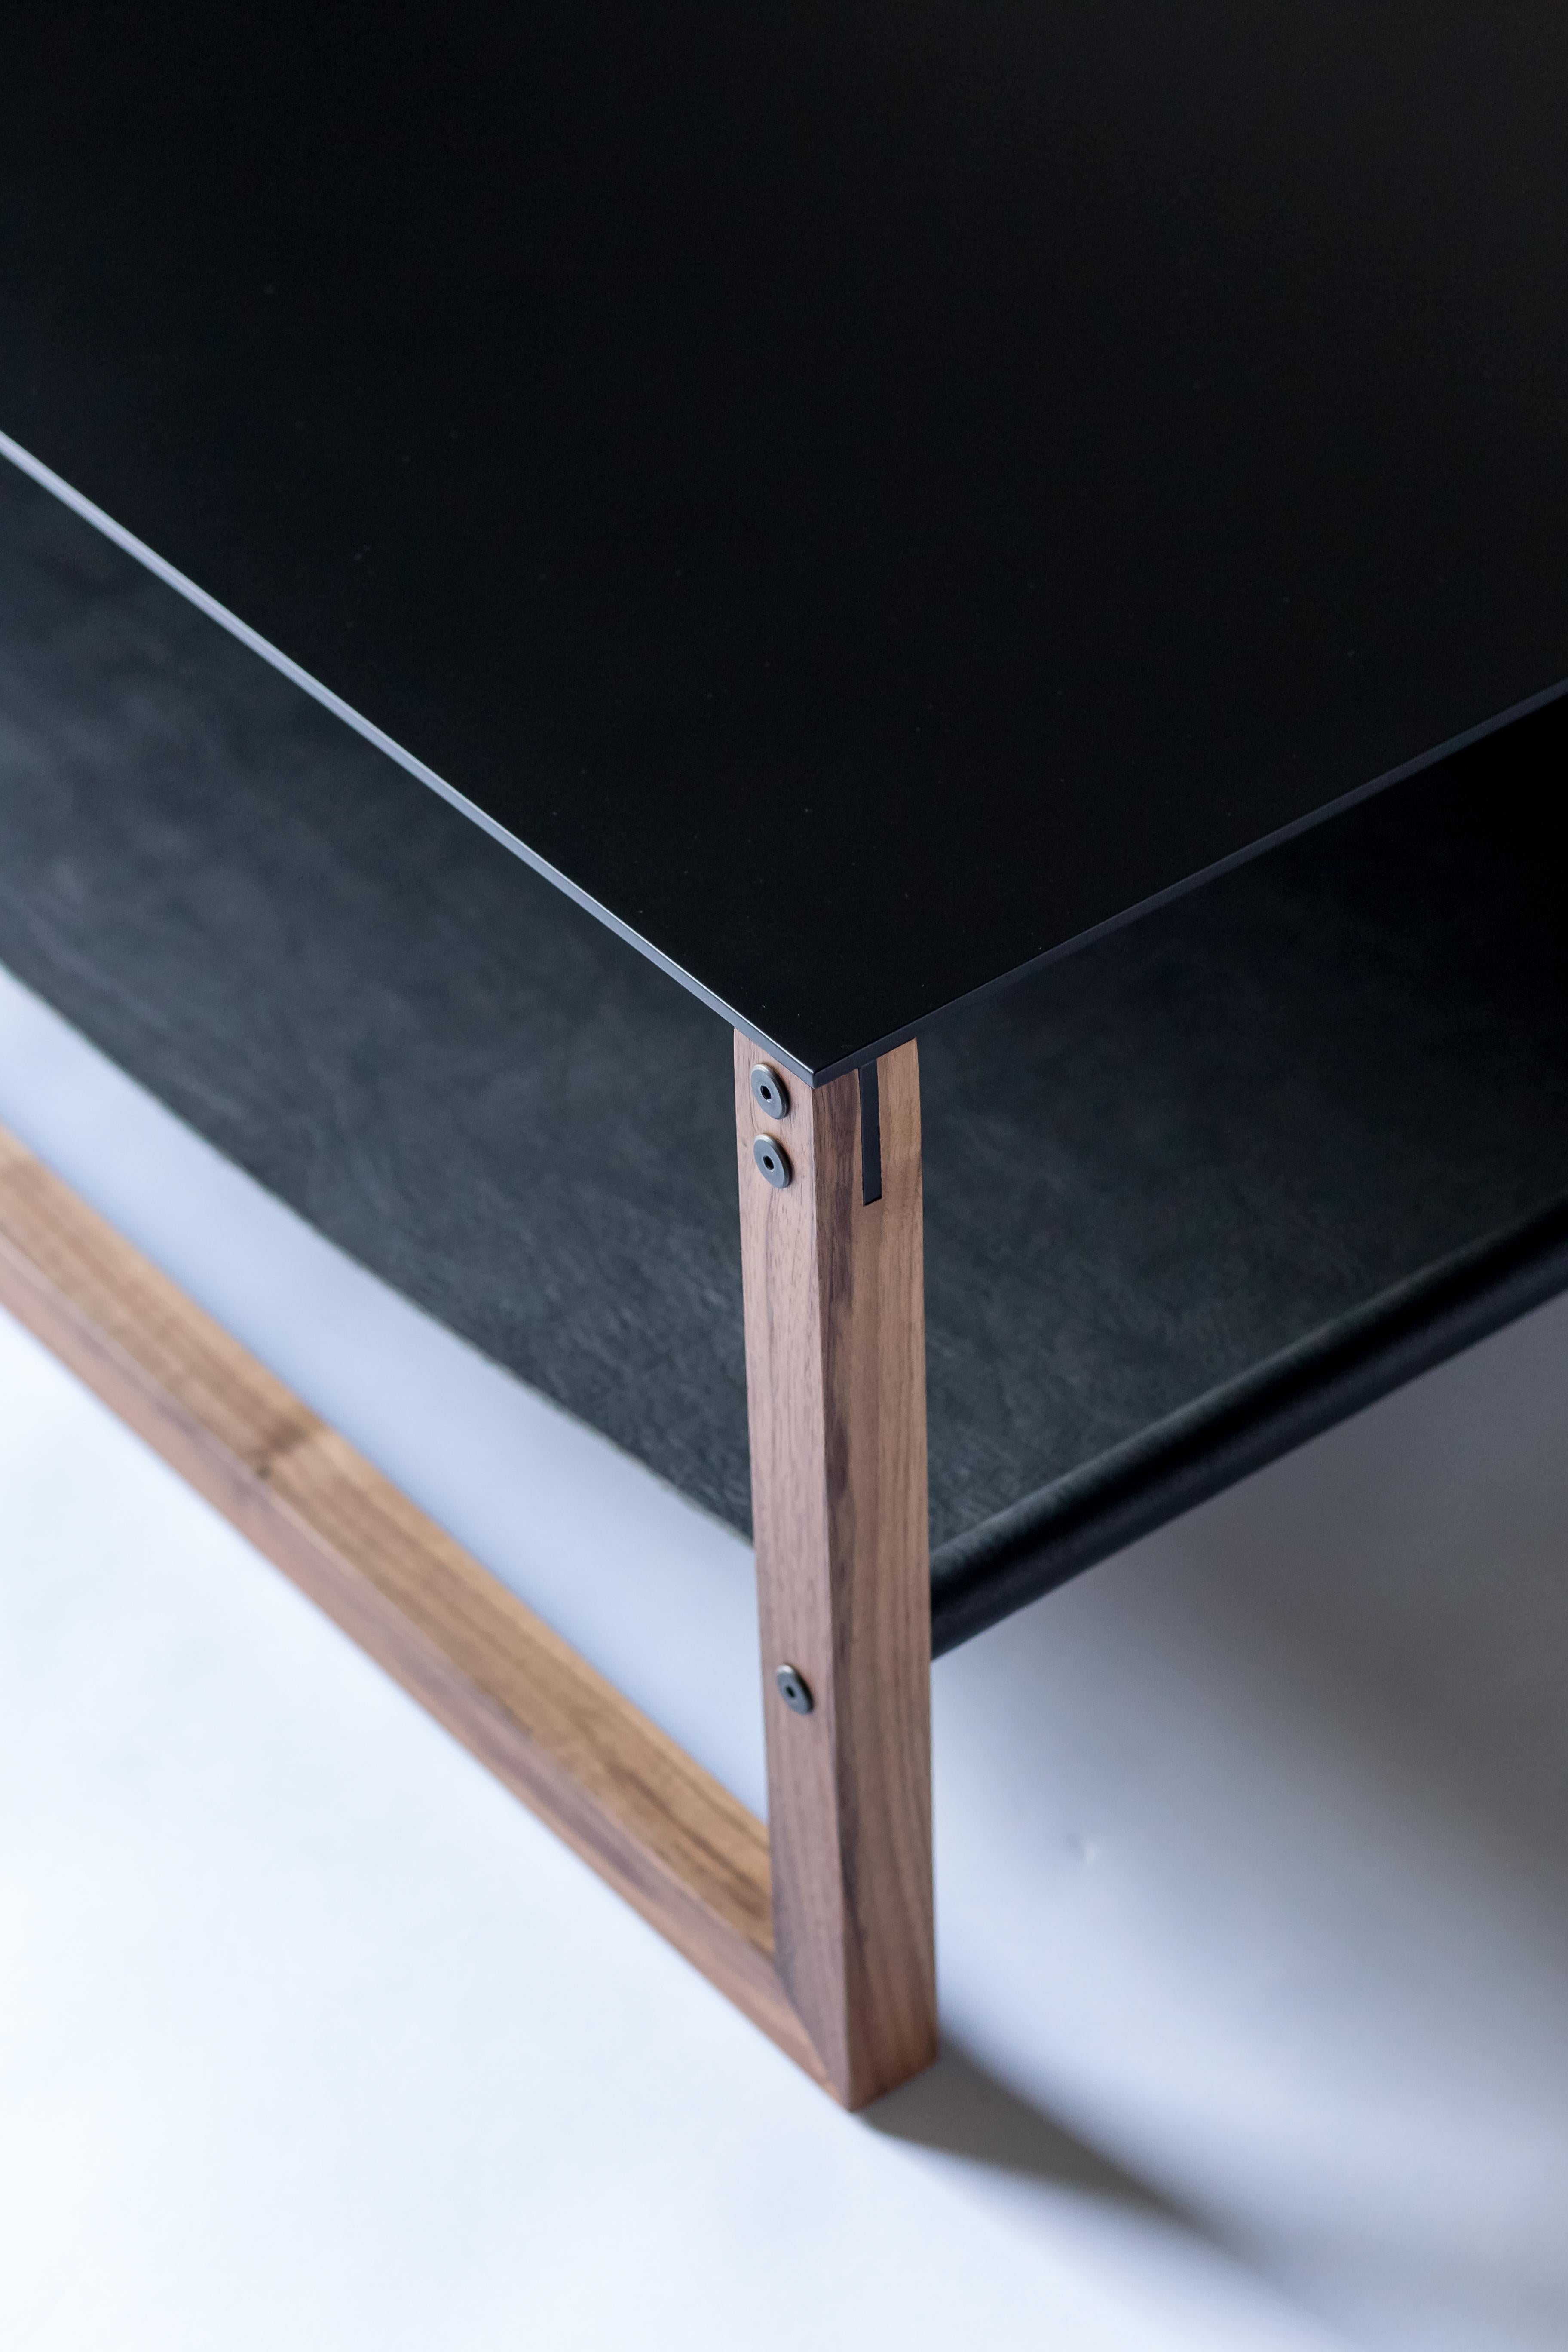 The Sling, Modern Aluminum, Leather and Walnut Square Coffee Table (Minimalistisch) im Angebot